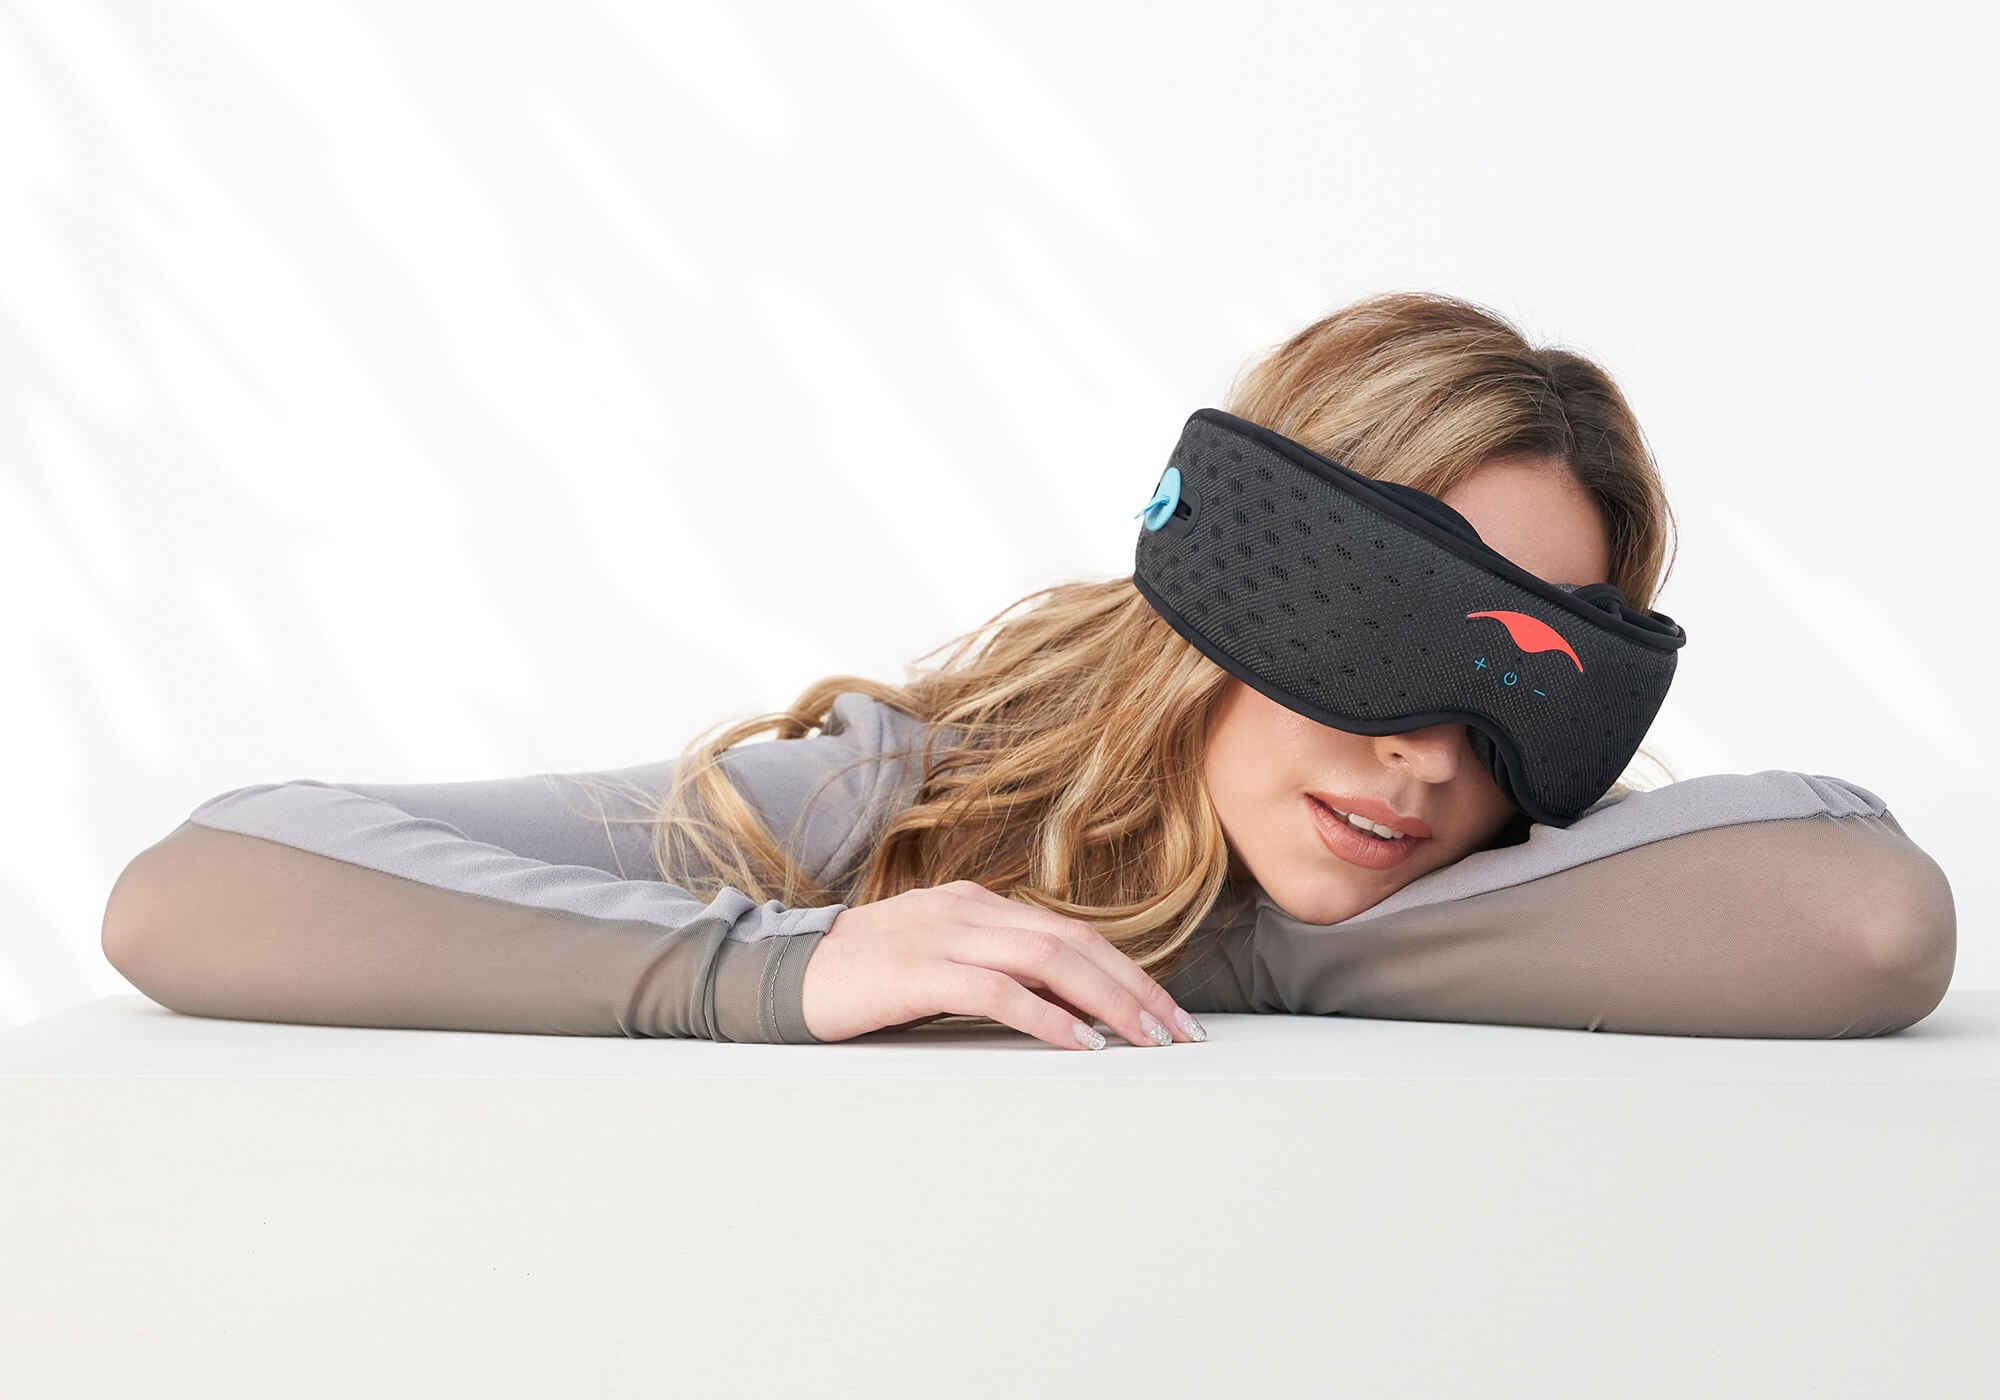 A girl leaning on her arm wearing the best eye mask for meditation with built-in headphones.